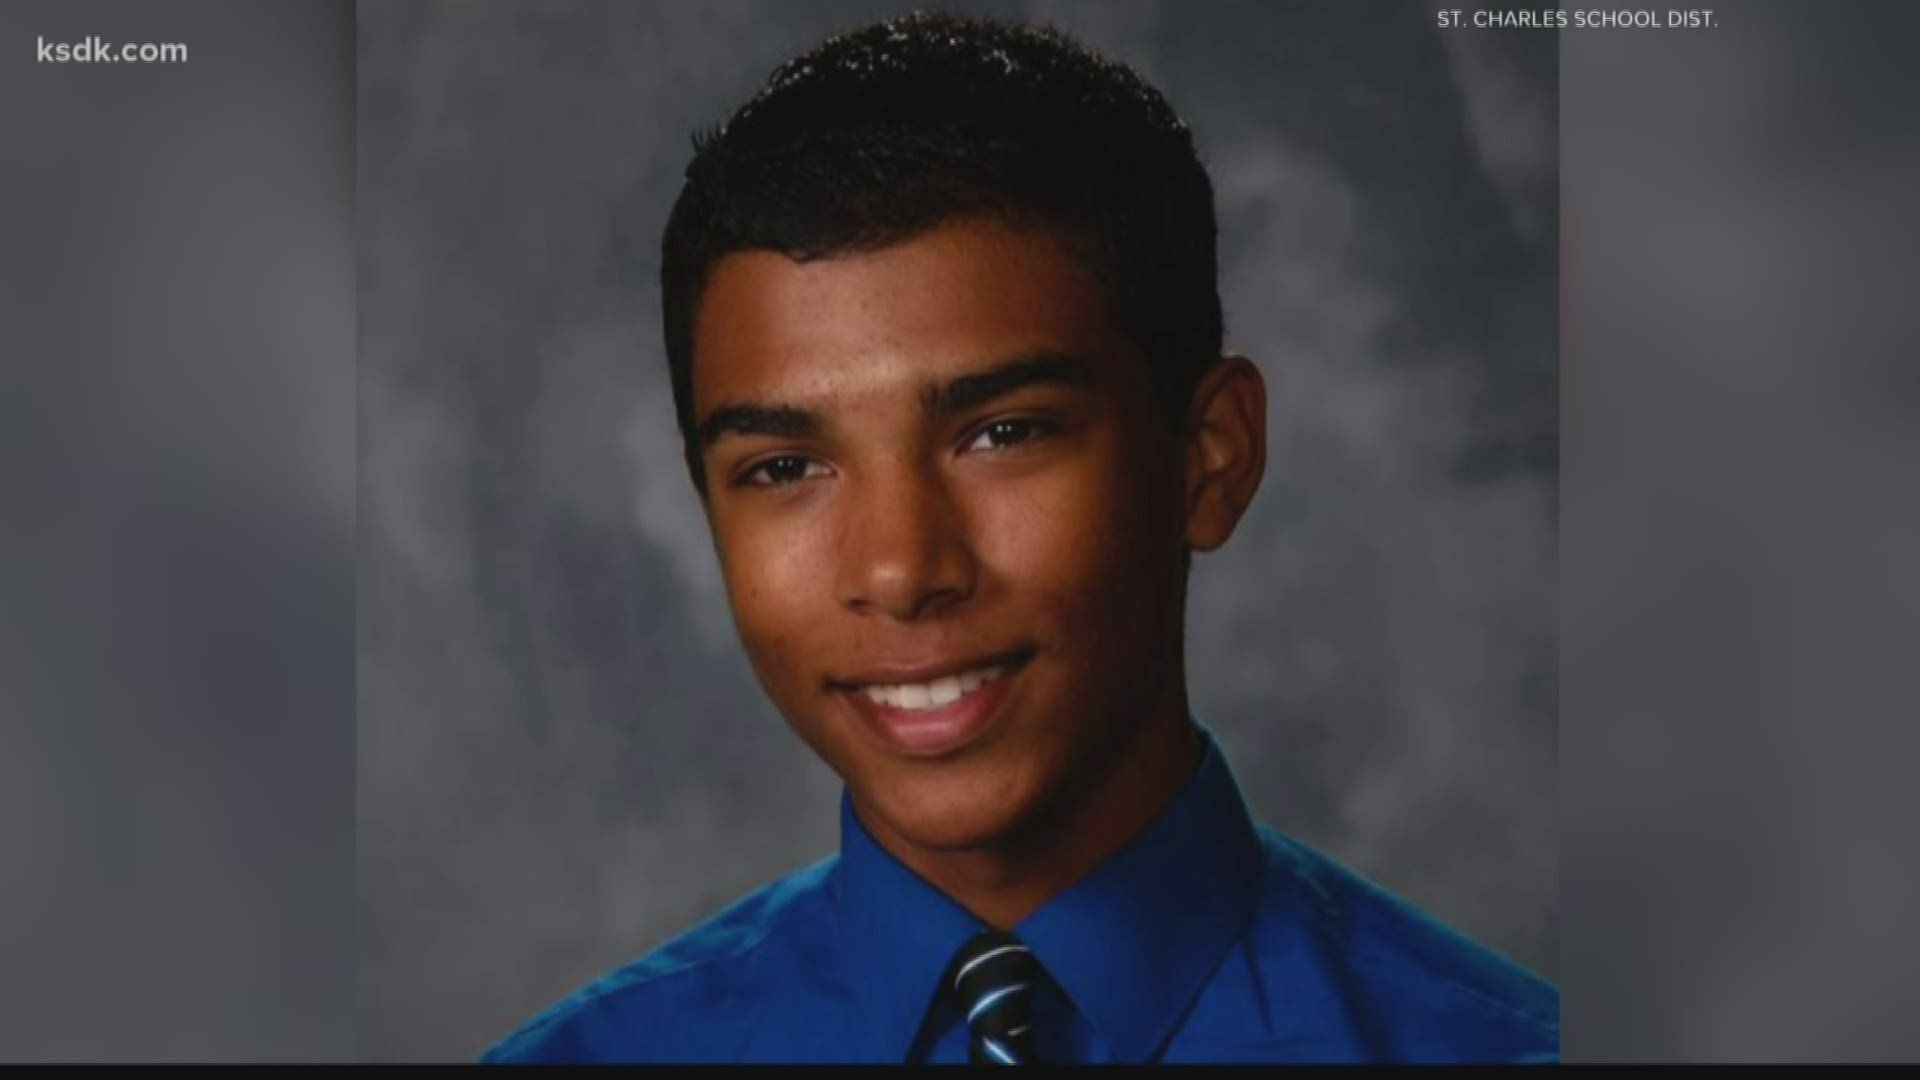 A young man from St. Charles was killed on his college campus when a gun accidentally went off.